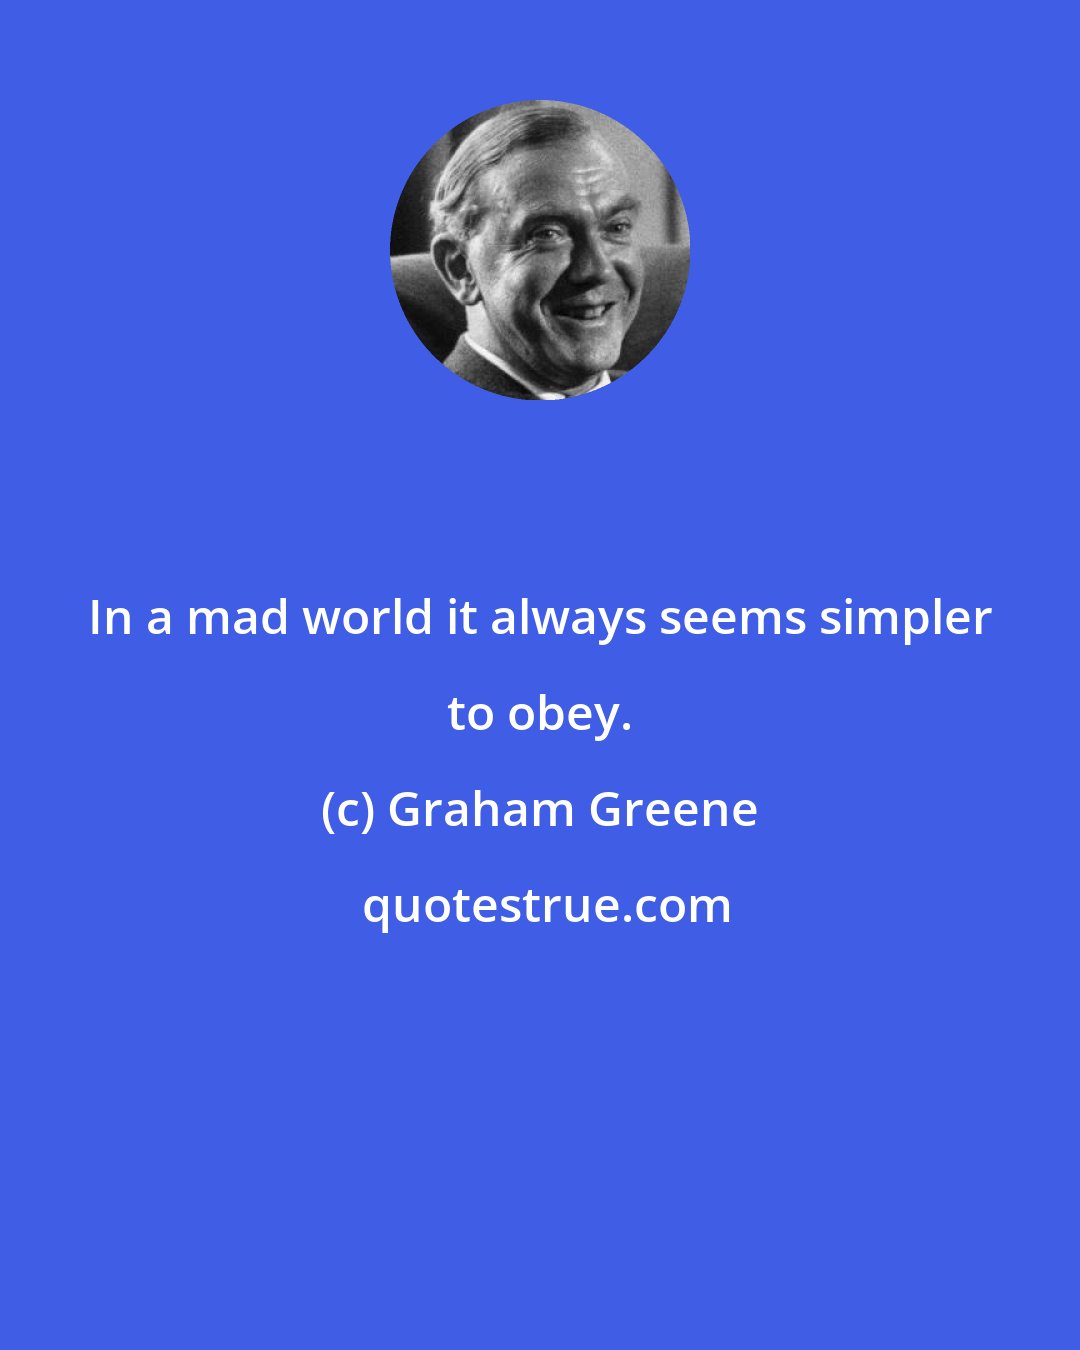 Graham Greene: In a mad world it always seems simpler to obey.